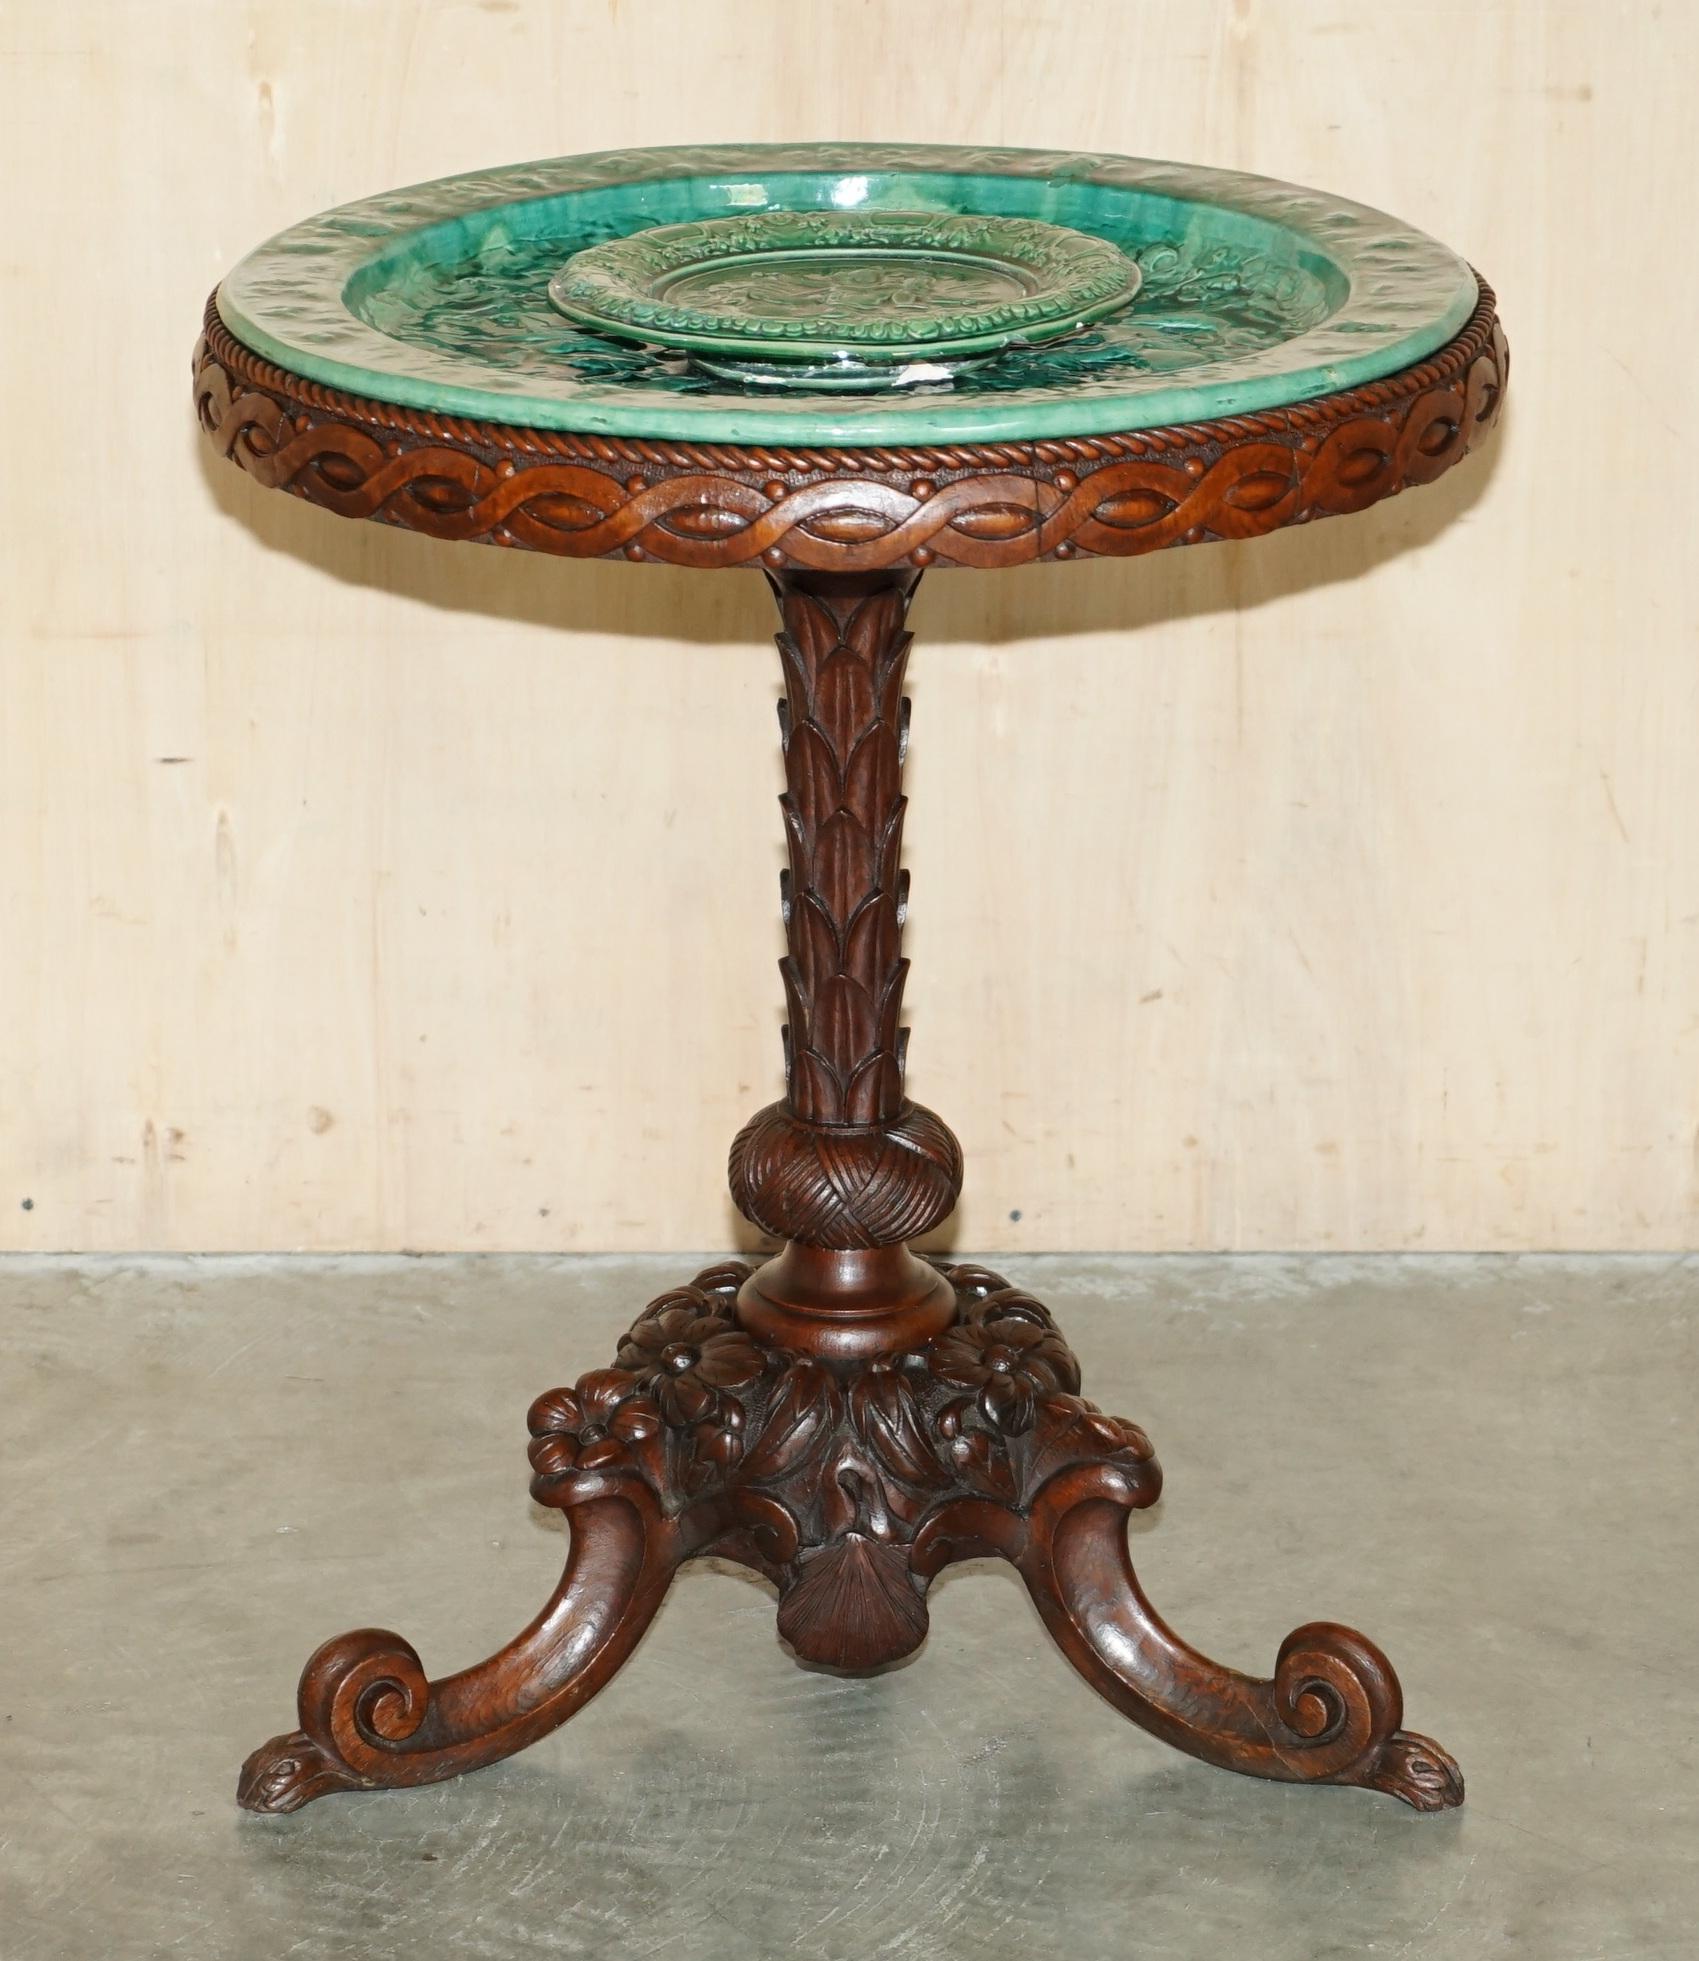 Royal House Antiques

Royal House Antiques is delighted to offer for sale this absolutely exquisite, museum quality hand carved Continental centre table with two tier Majolica charger depicting classical scenes and horses 

Please note the delivery